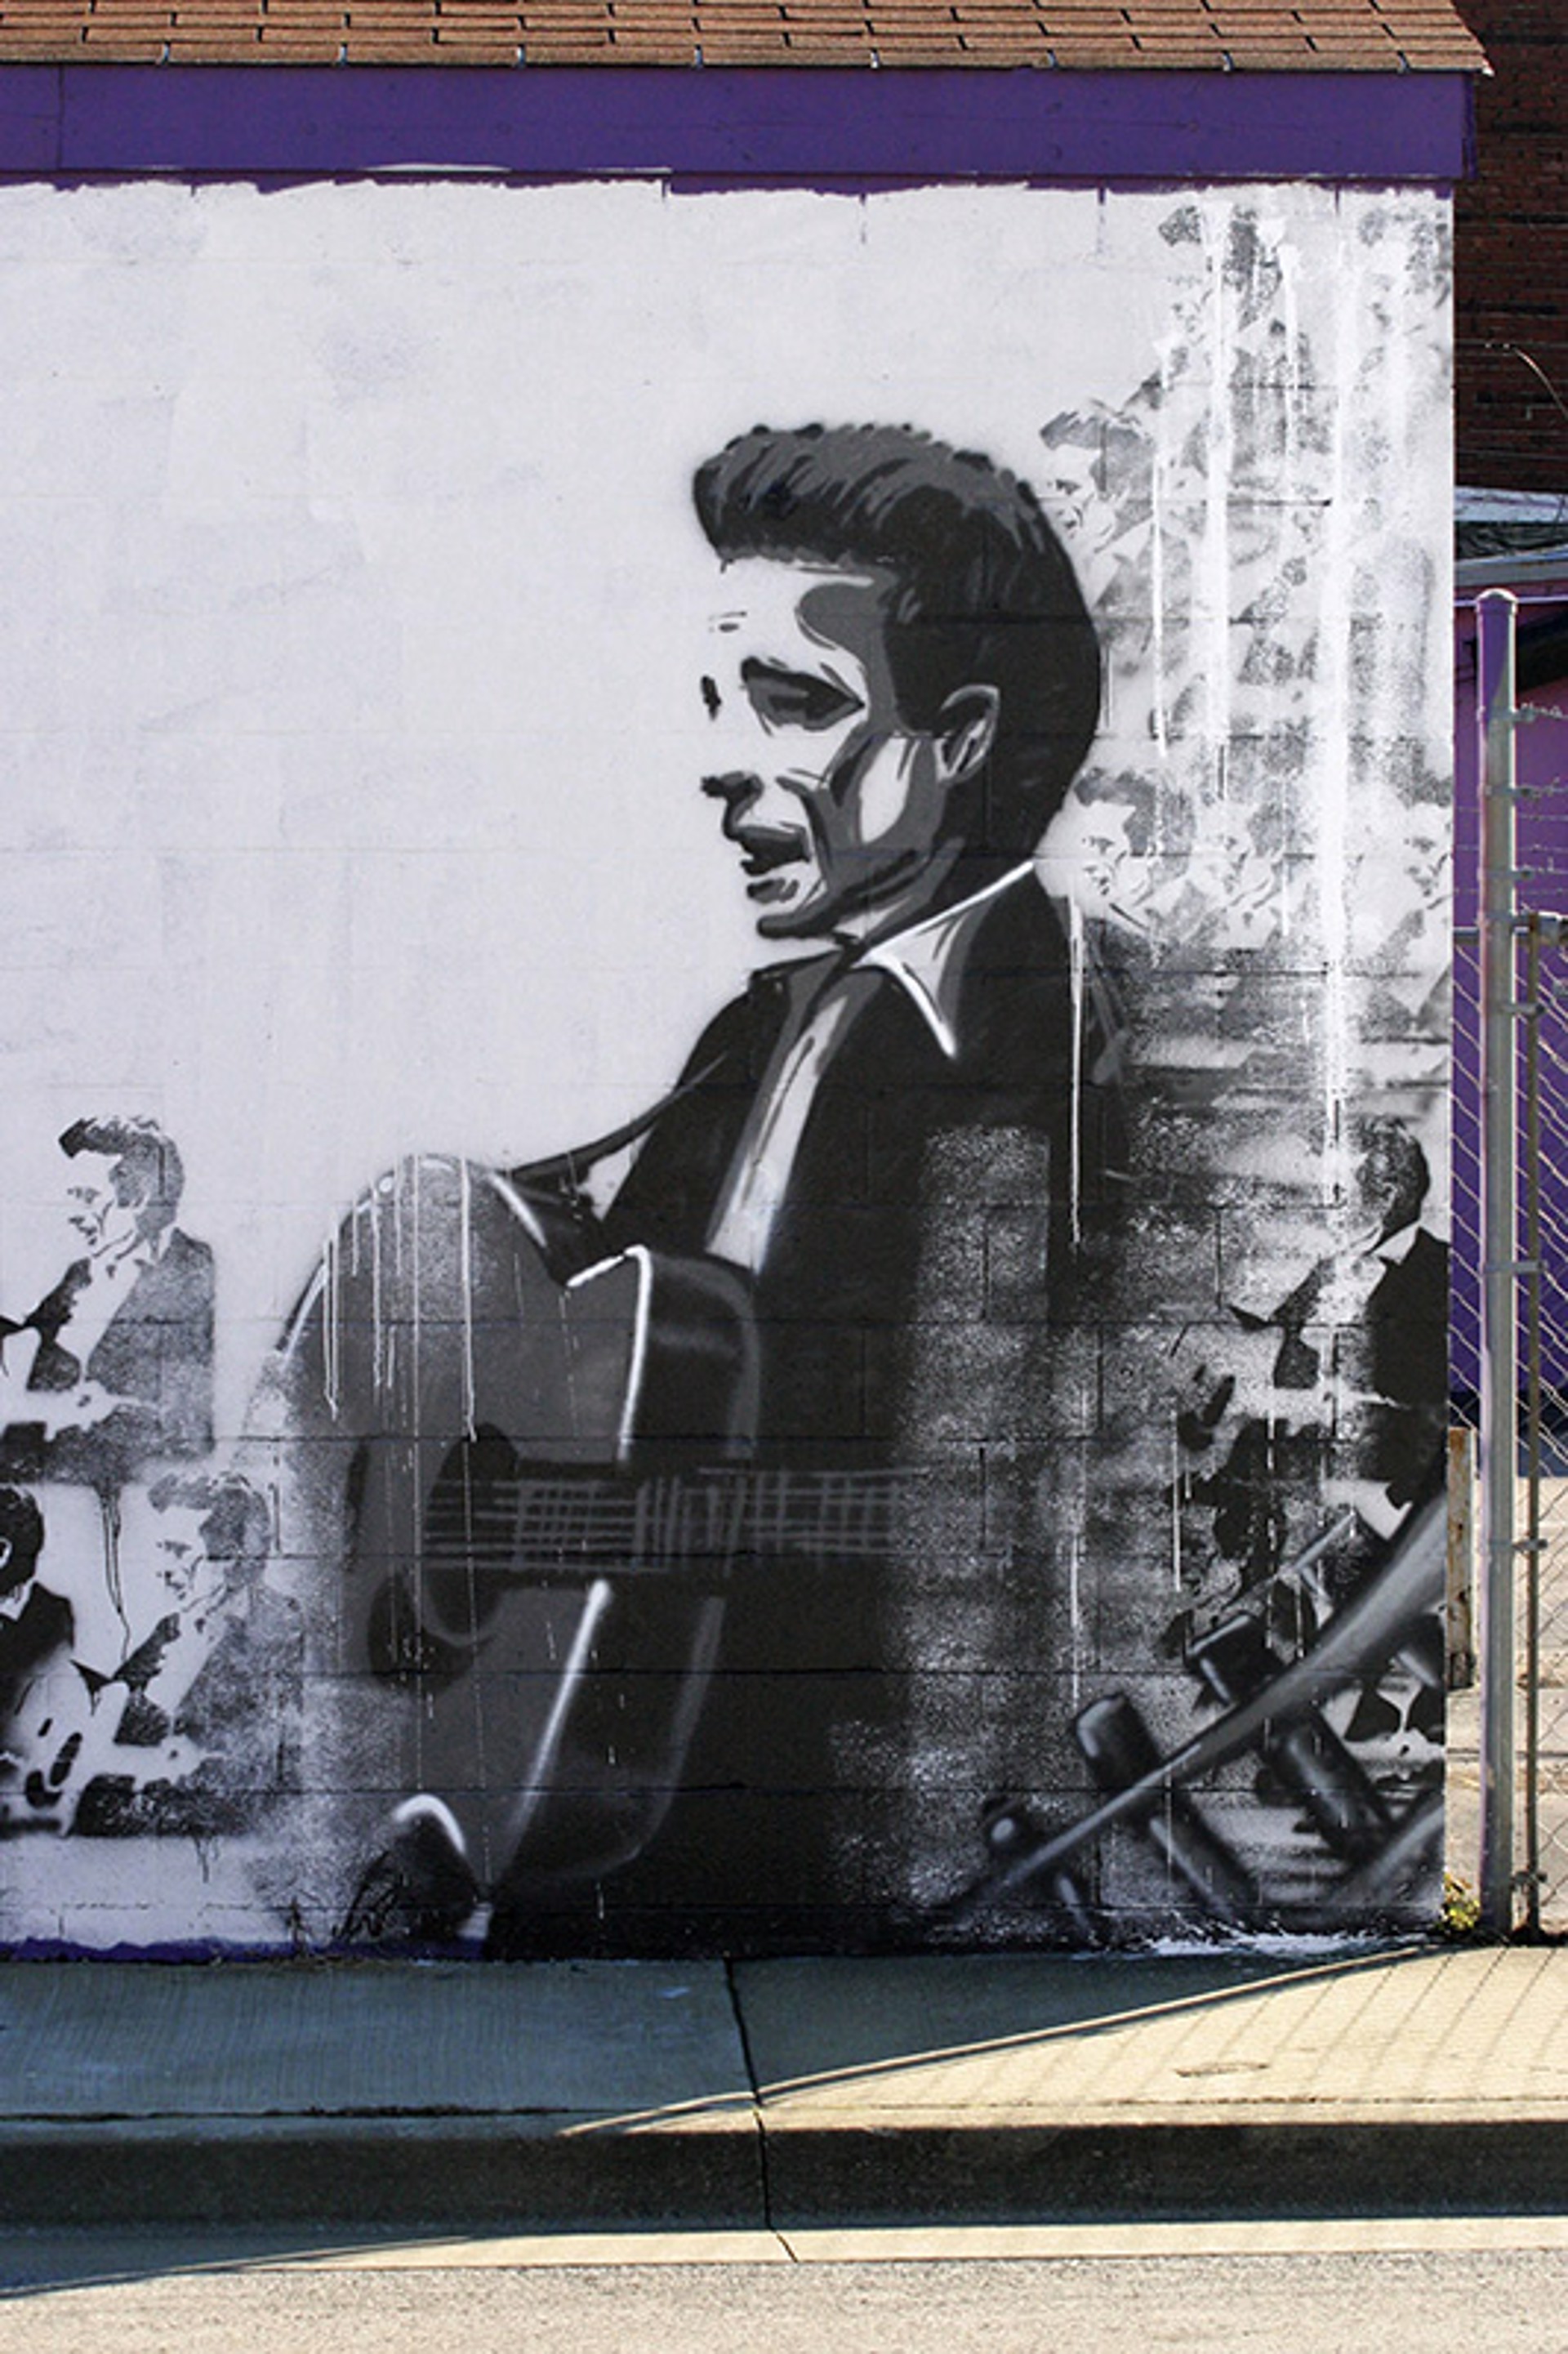 Johnny Cash and Guitar by Jerry Park